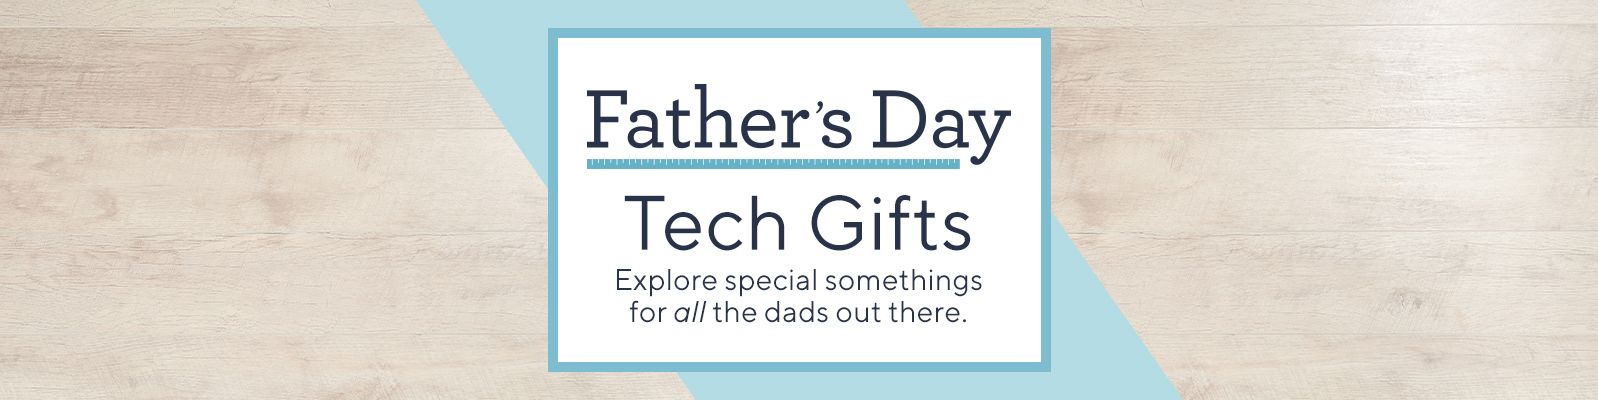 Father's Day Tech Gifts.  Explore special somethings for all the dads out there.